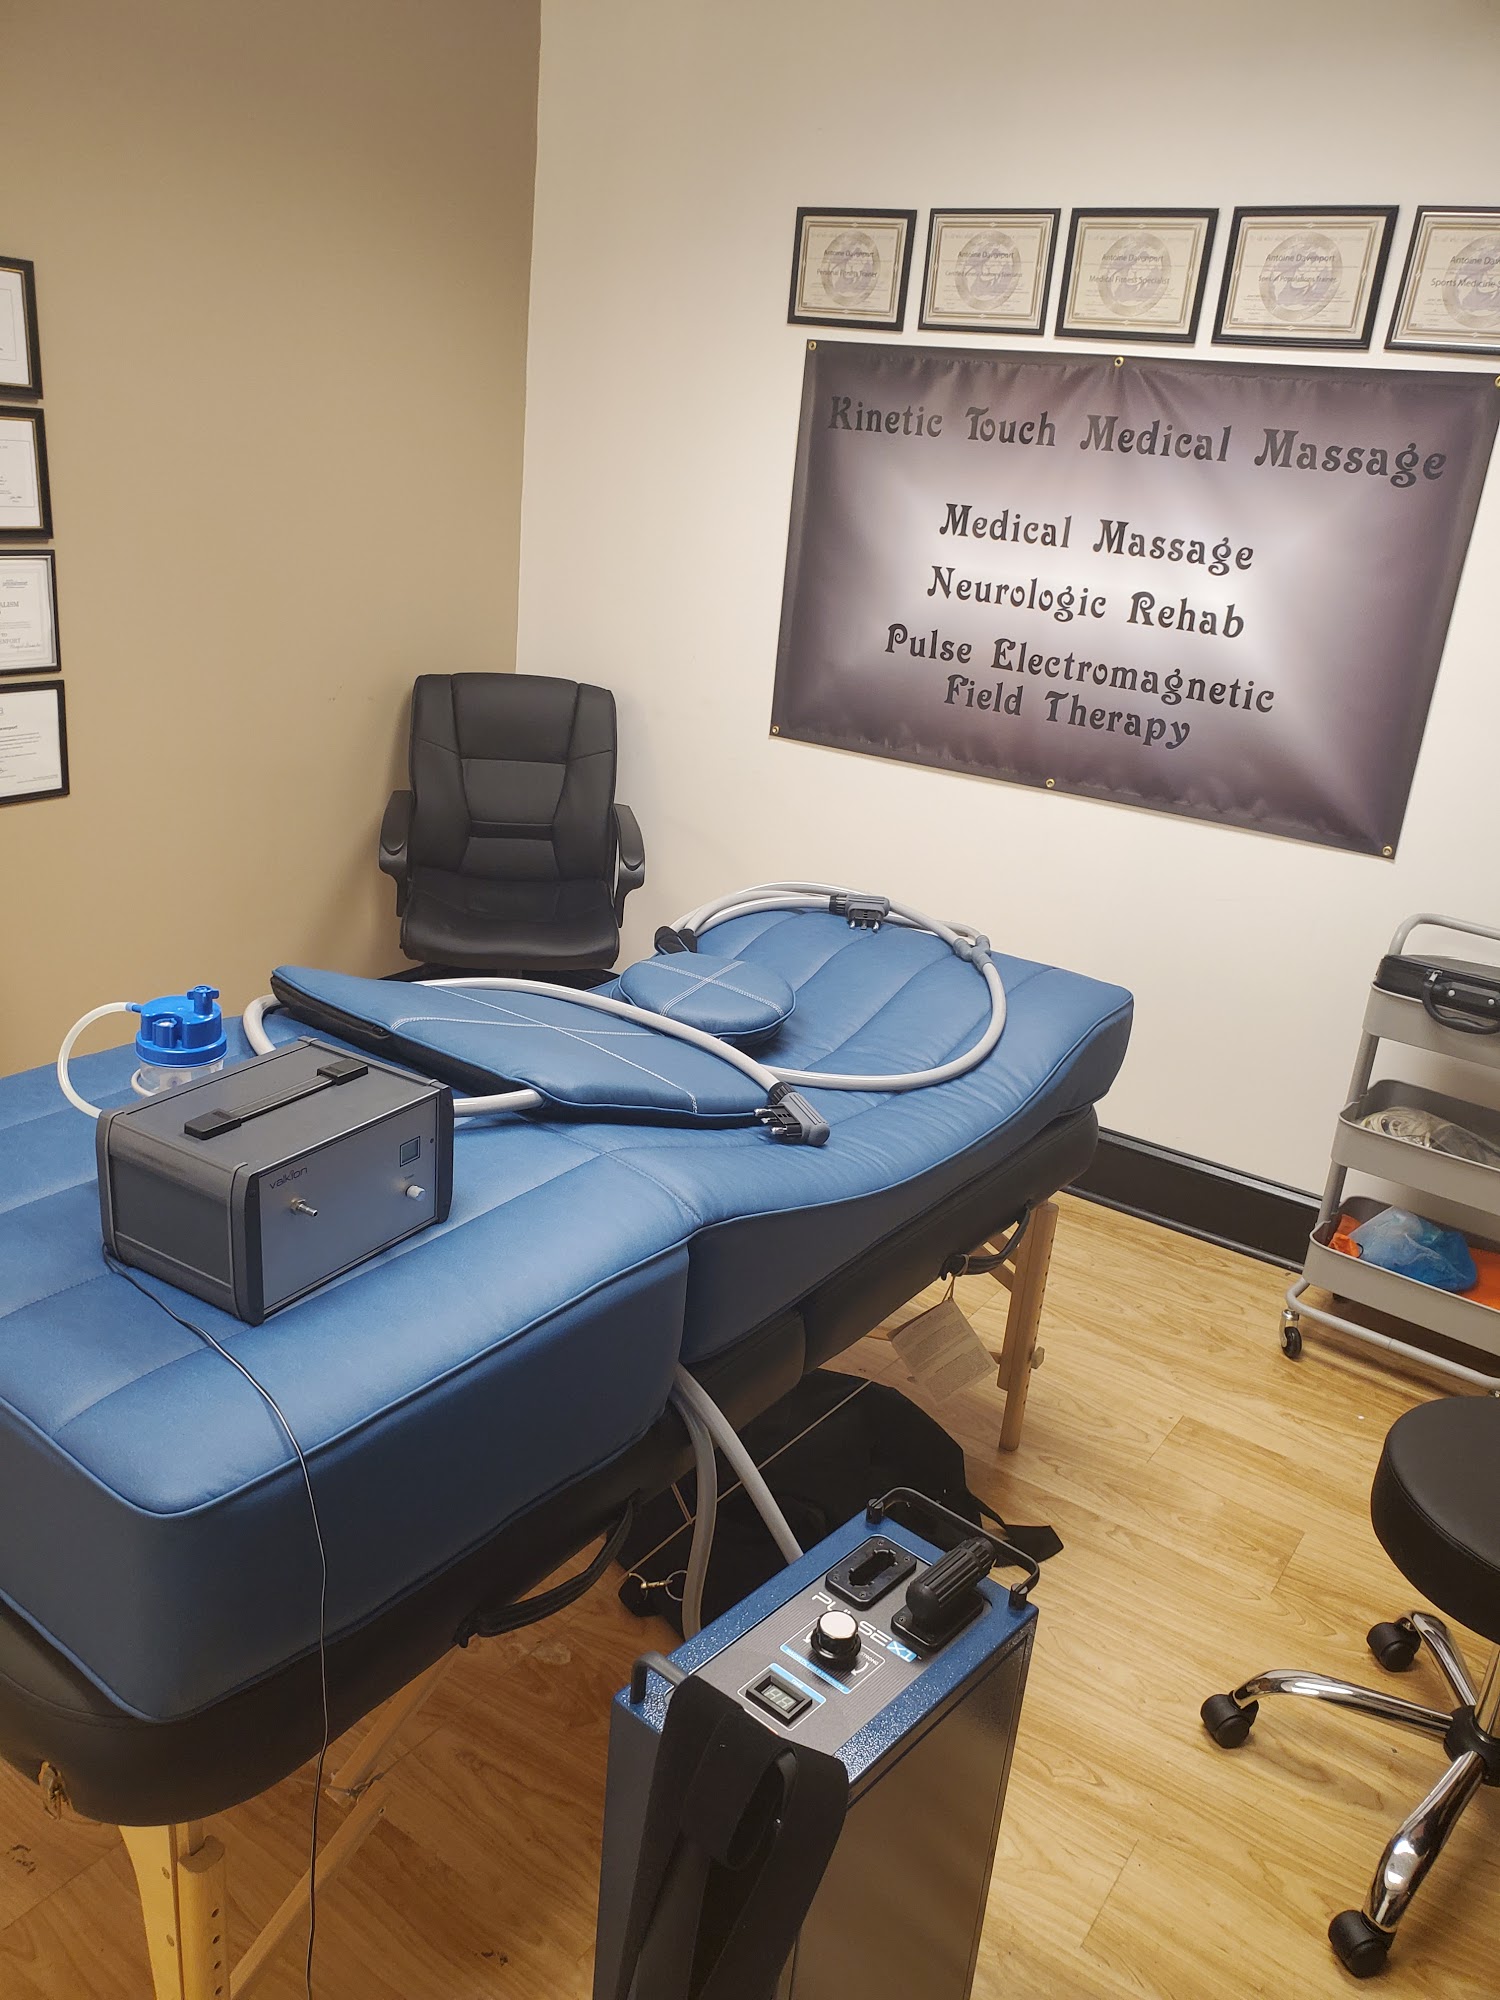 Kinetic Touch Medical